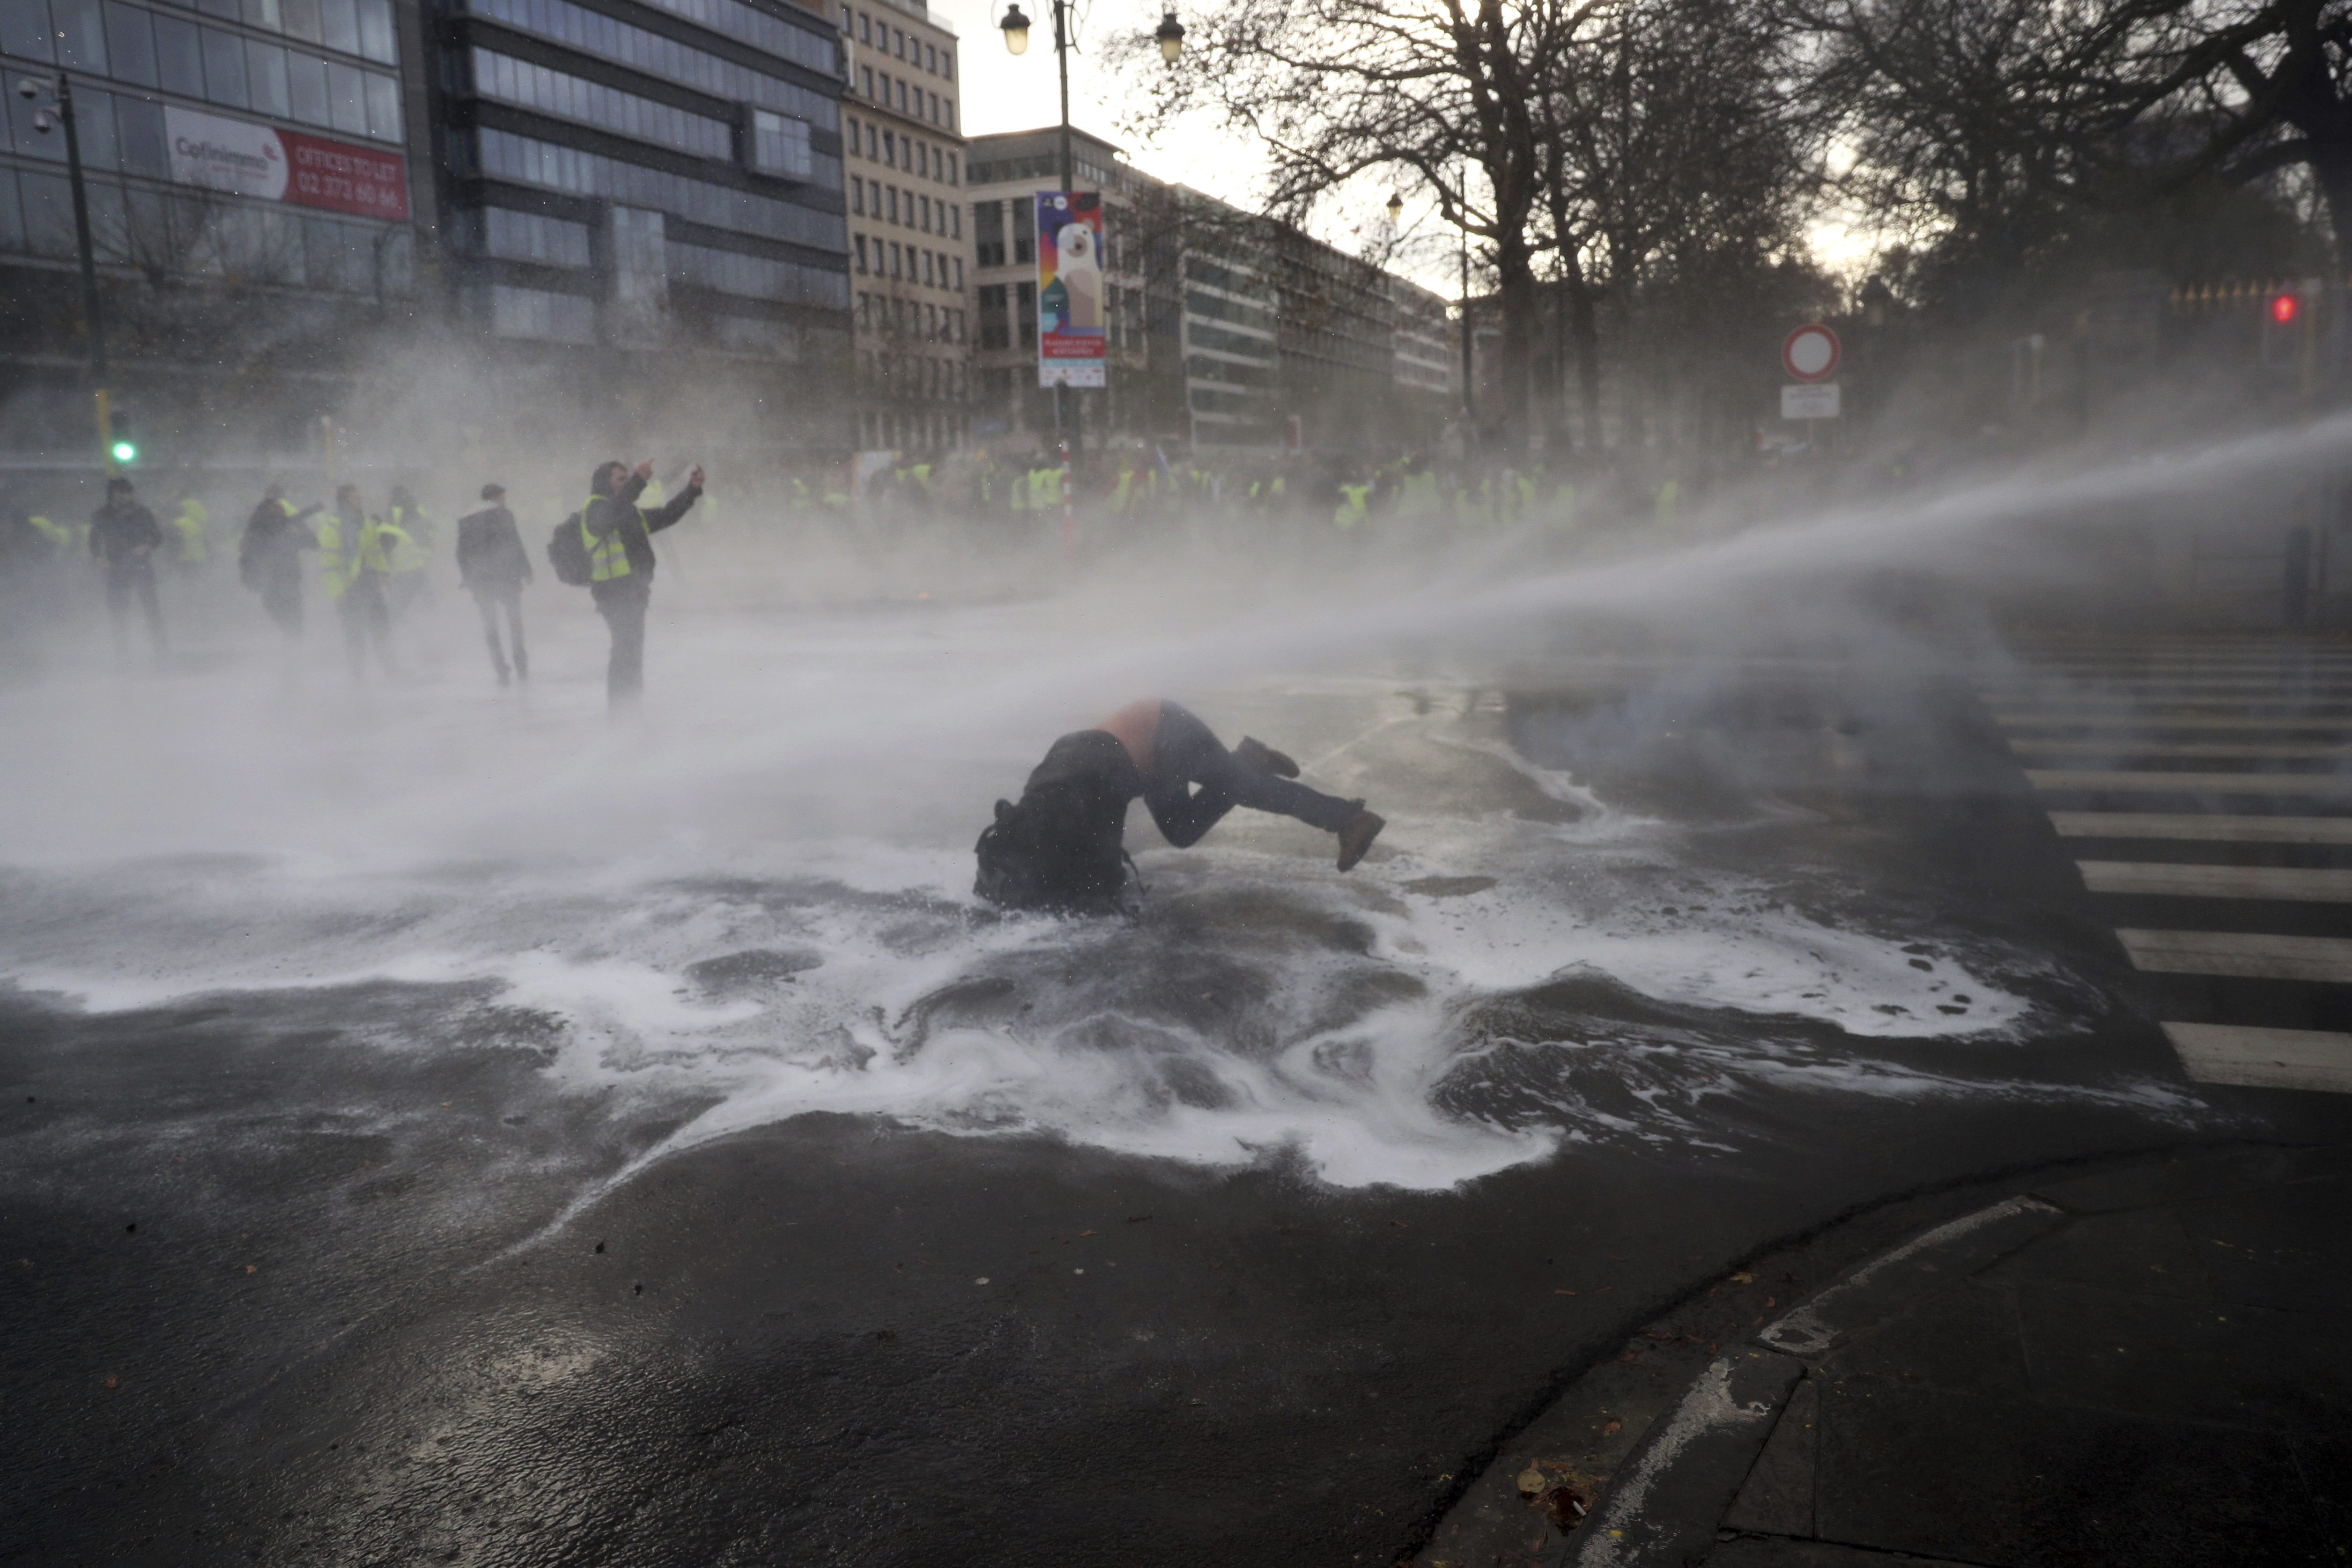 A demonstrator gets hit by a water cannon during a protest of the 'yellow jackets' in Brussels 